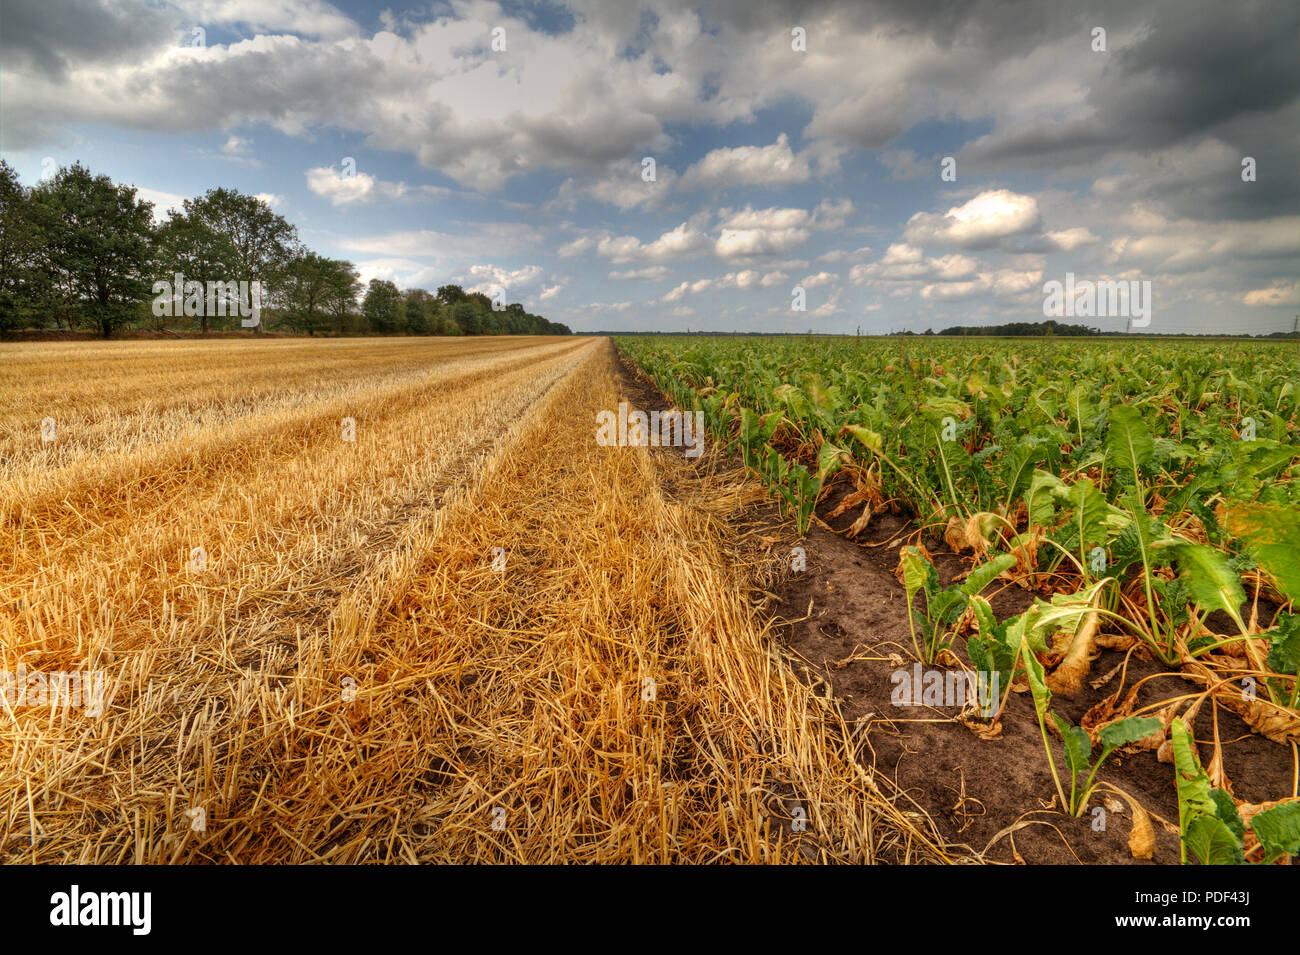 Rural landscape under blue sky with dark clouds, corn stubbles and sugar beet Stock Photo